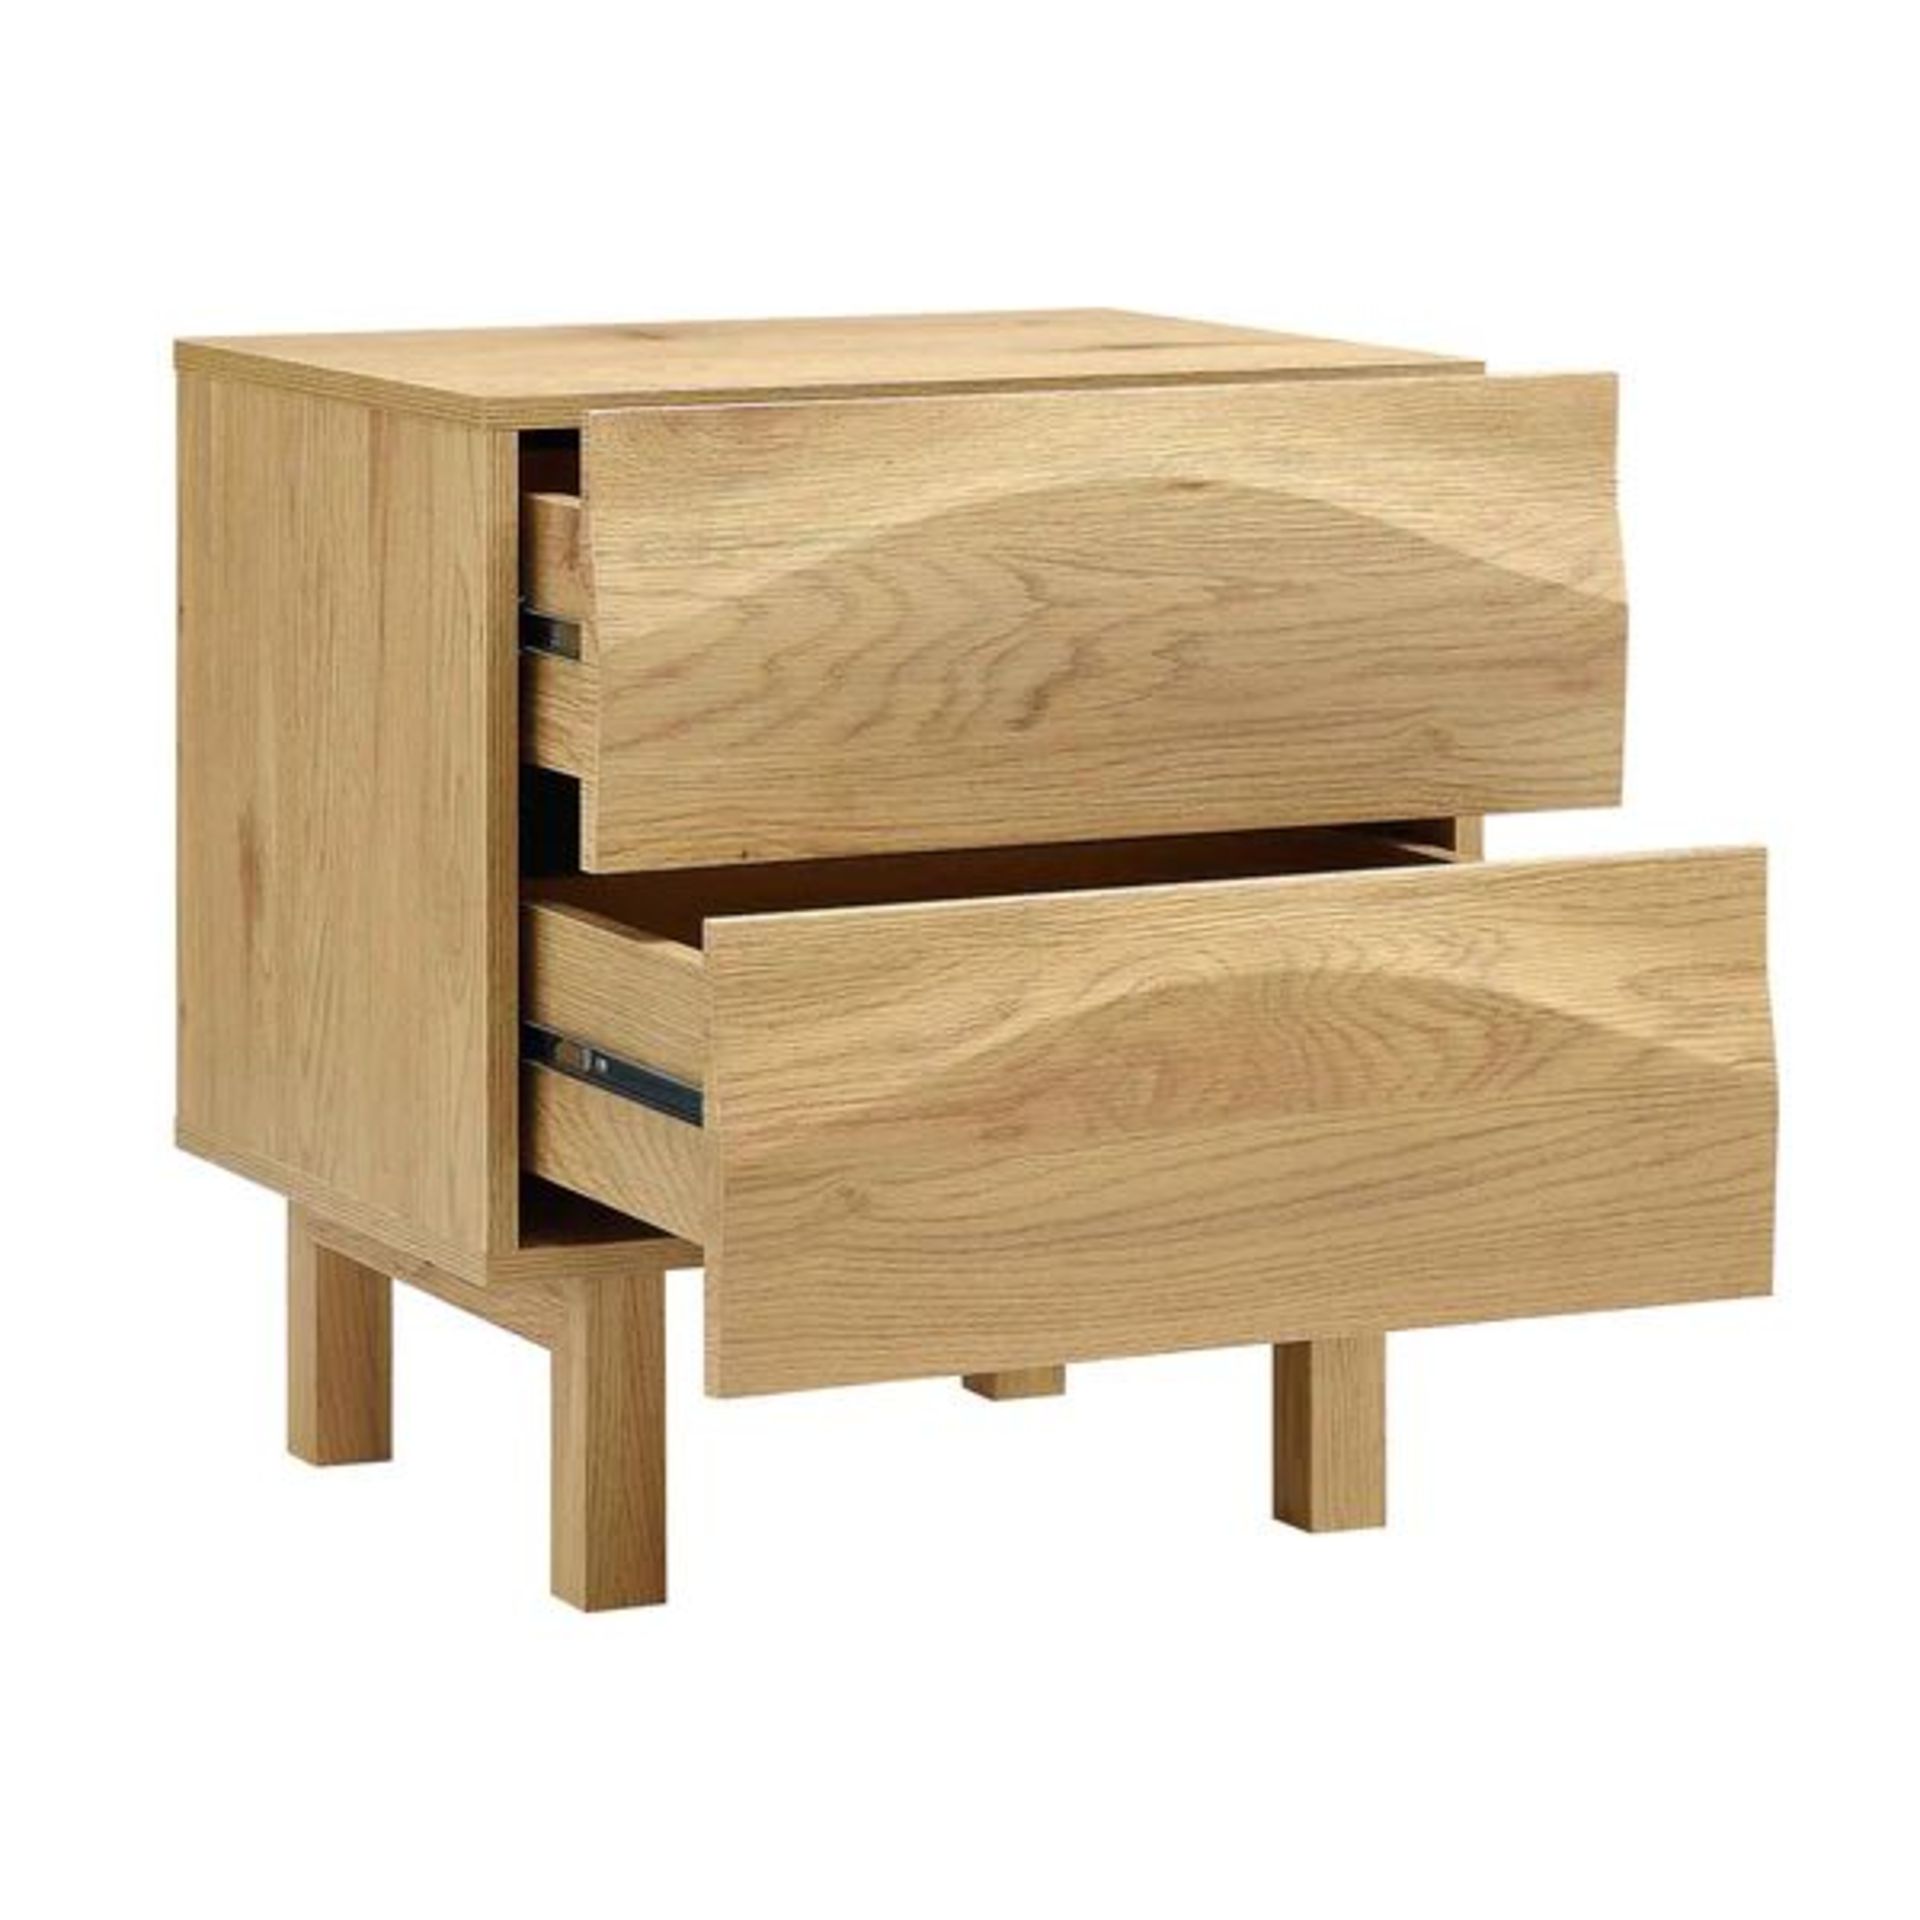 Moriko 2 Drawer Bedside Table. - R14. RRP £199.99. The unique sculptural facade features flowing - Image 2 of 2